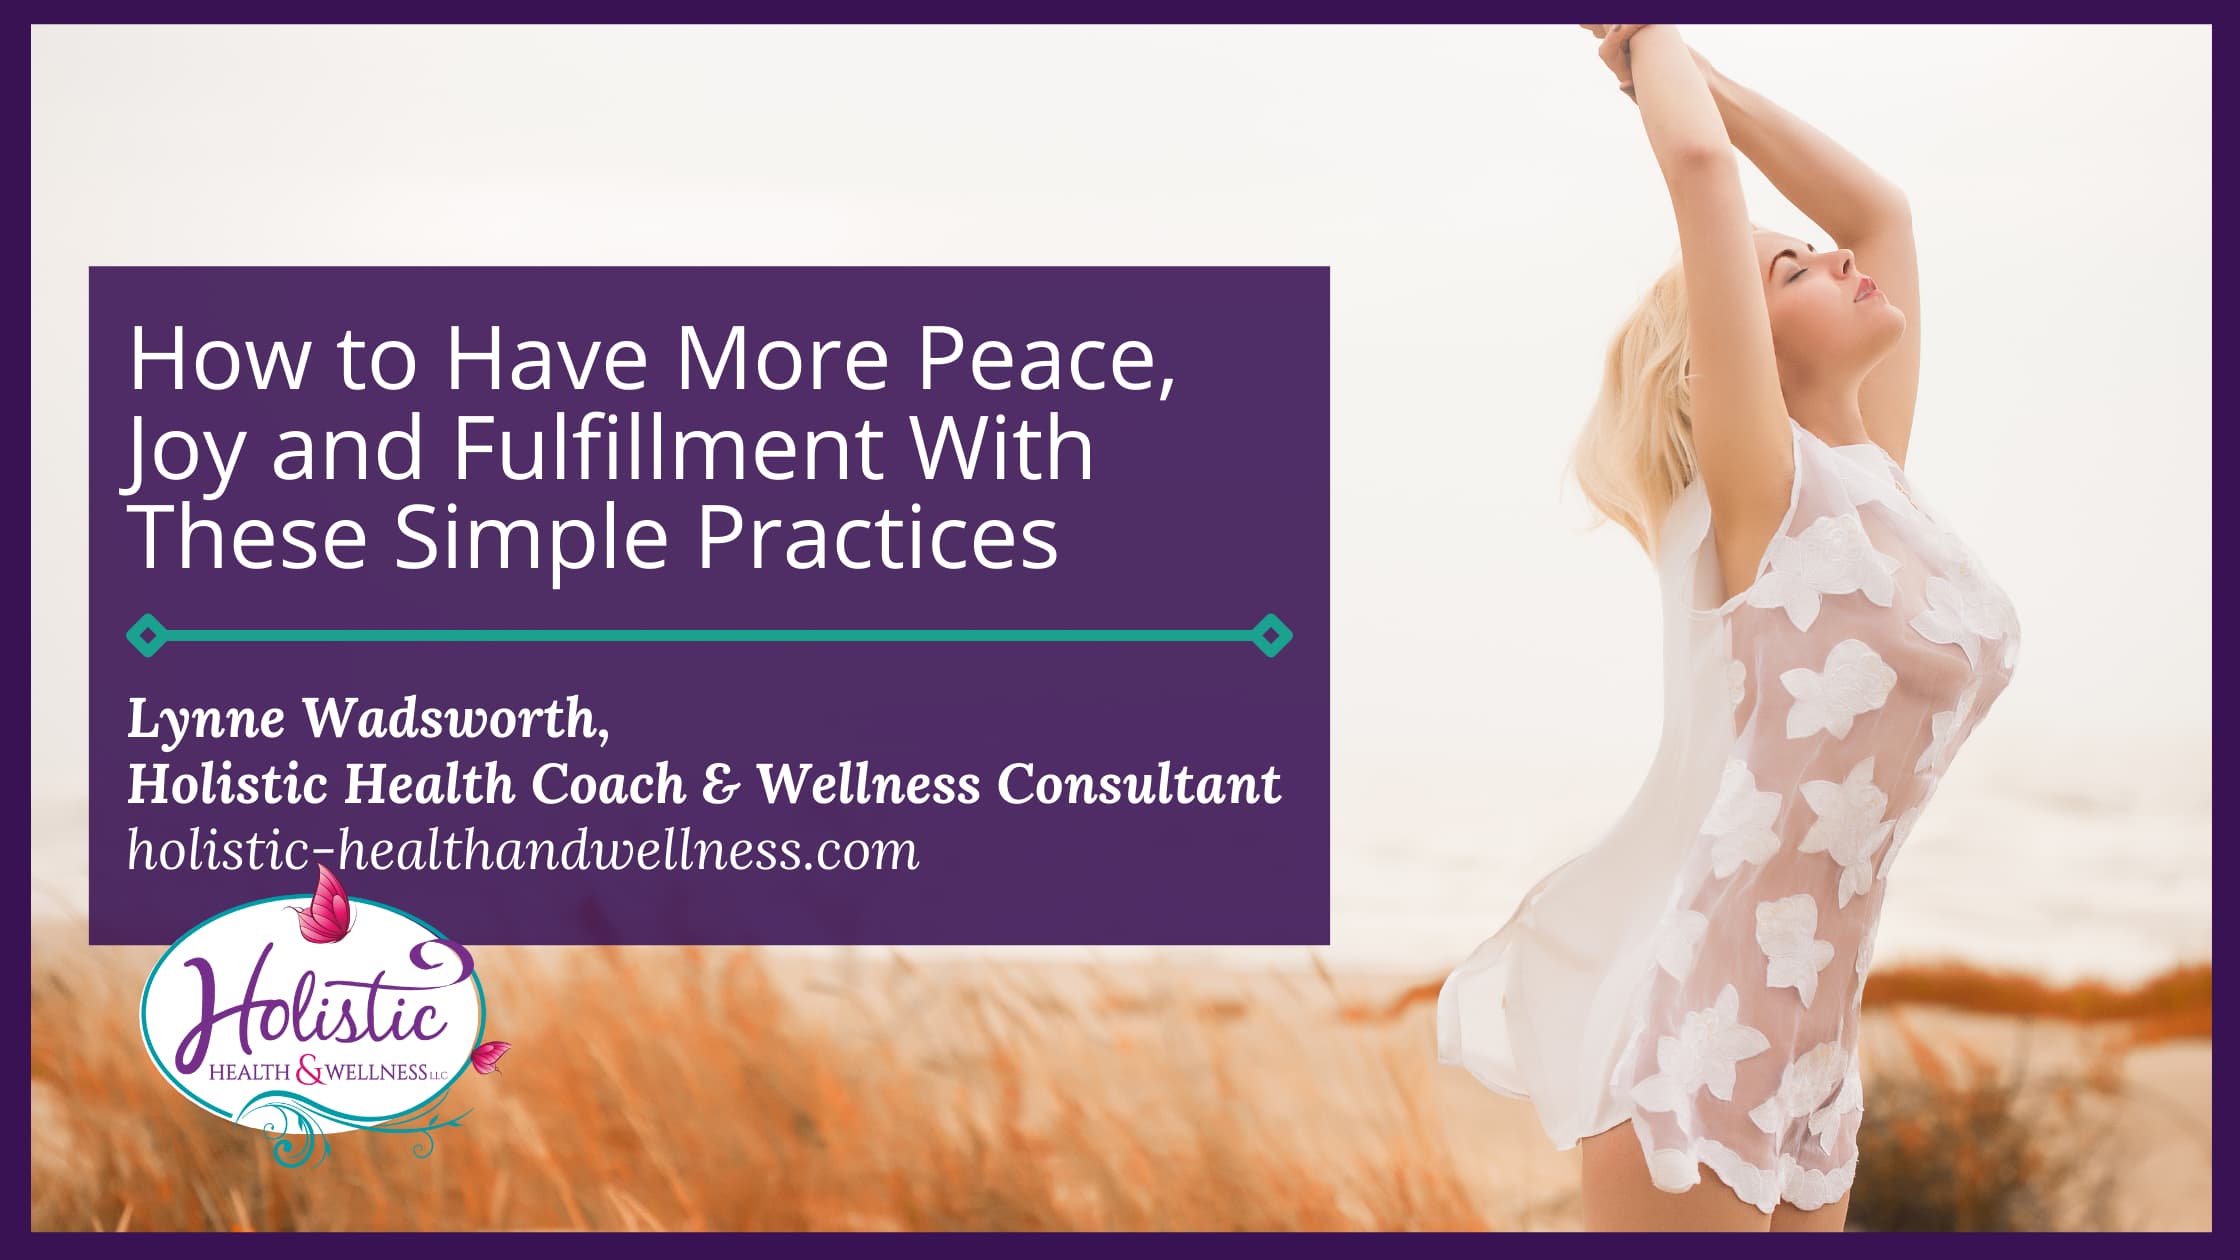 How to Have More Peace, Joy and Fulfillment With These Simple Practices